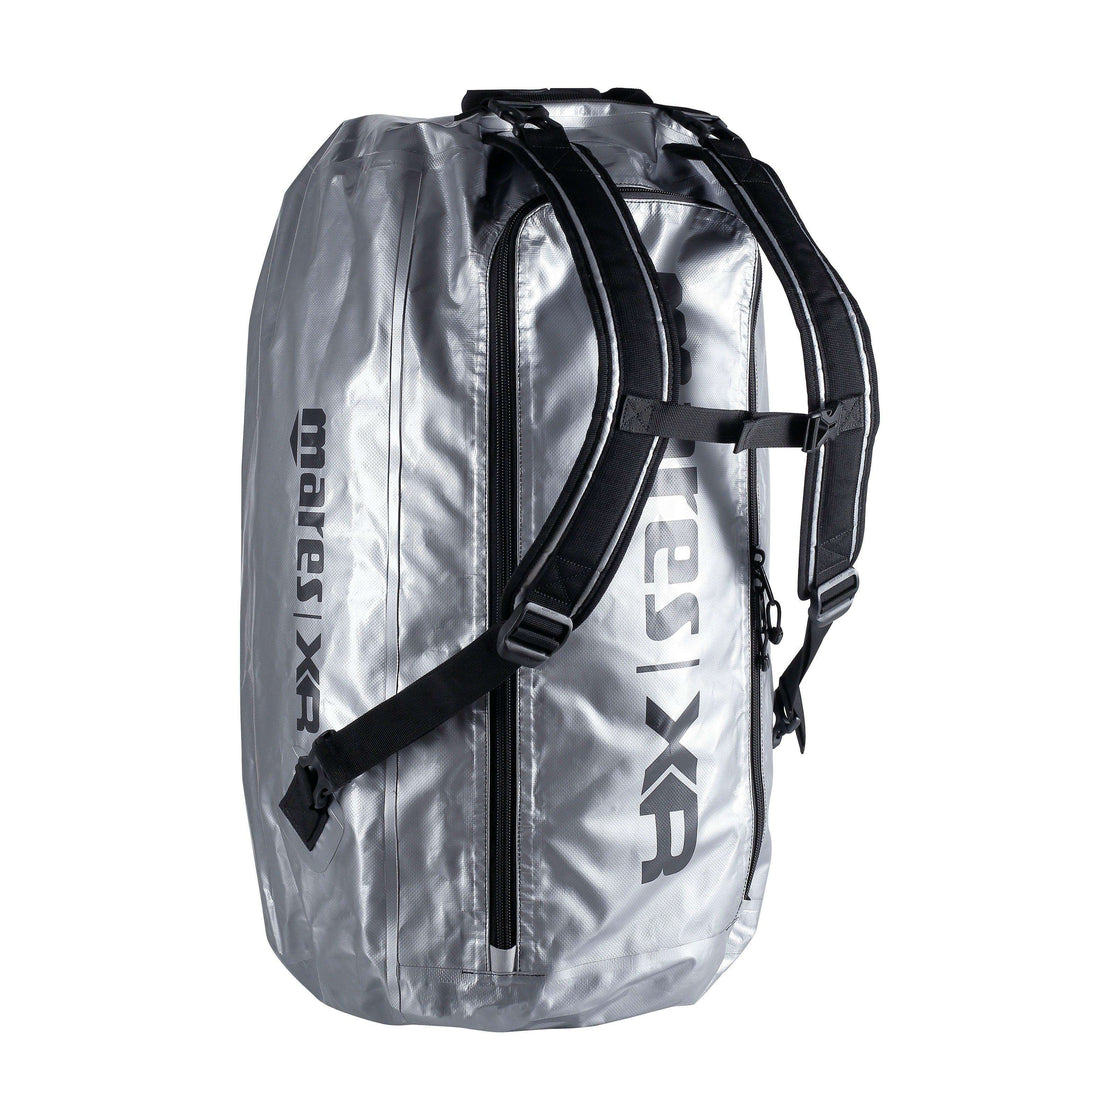 Mares EXPEDITION BAG - WATERSPORTS24